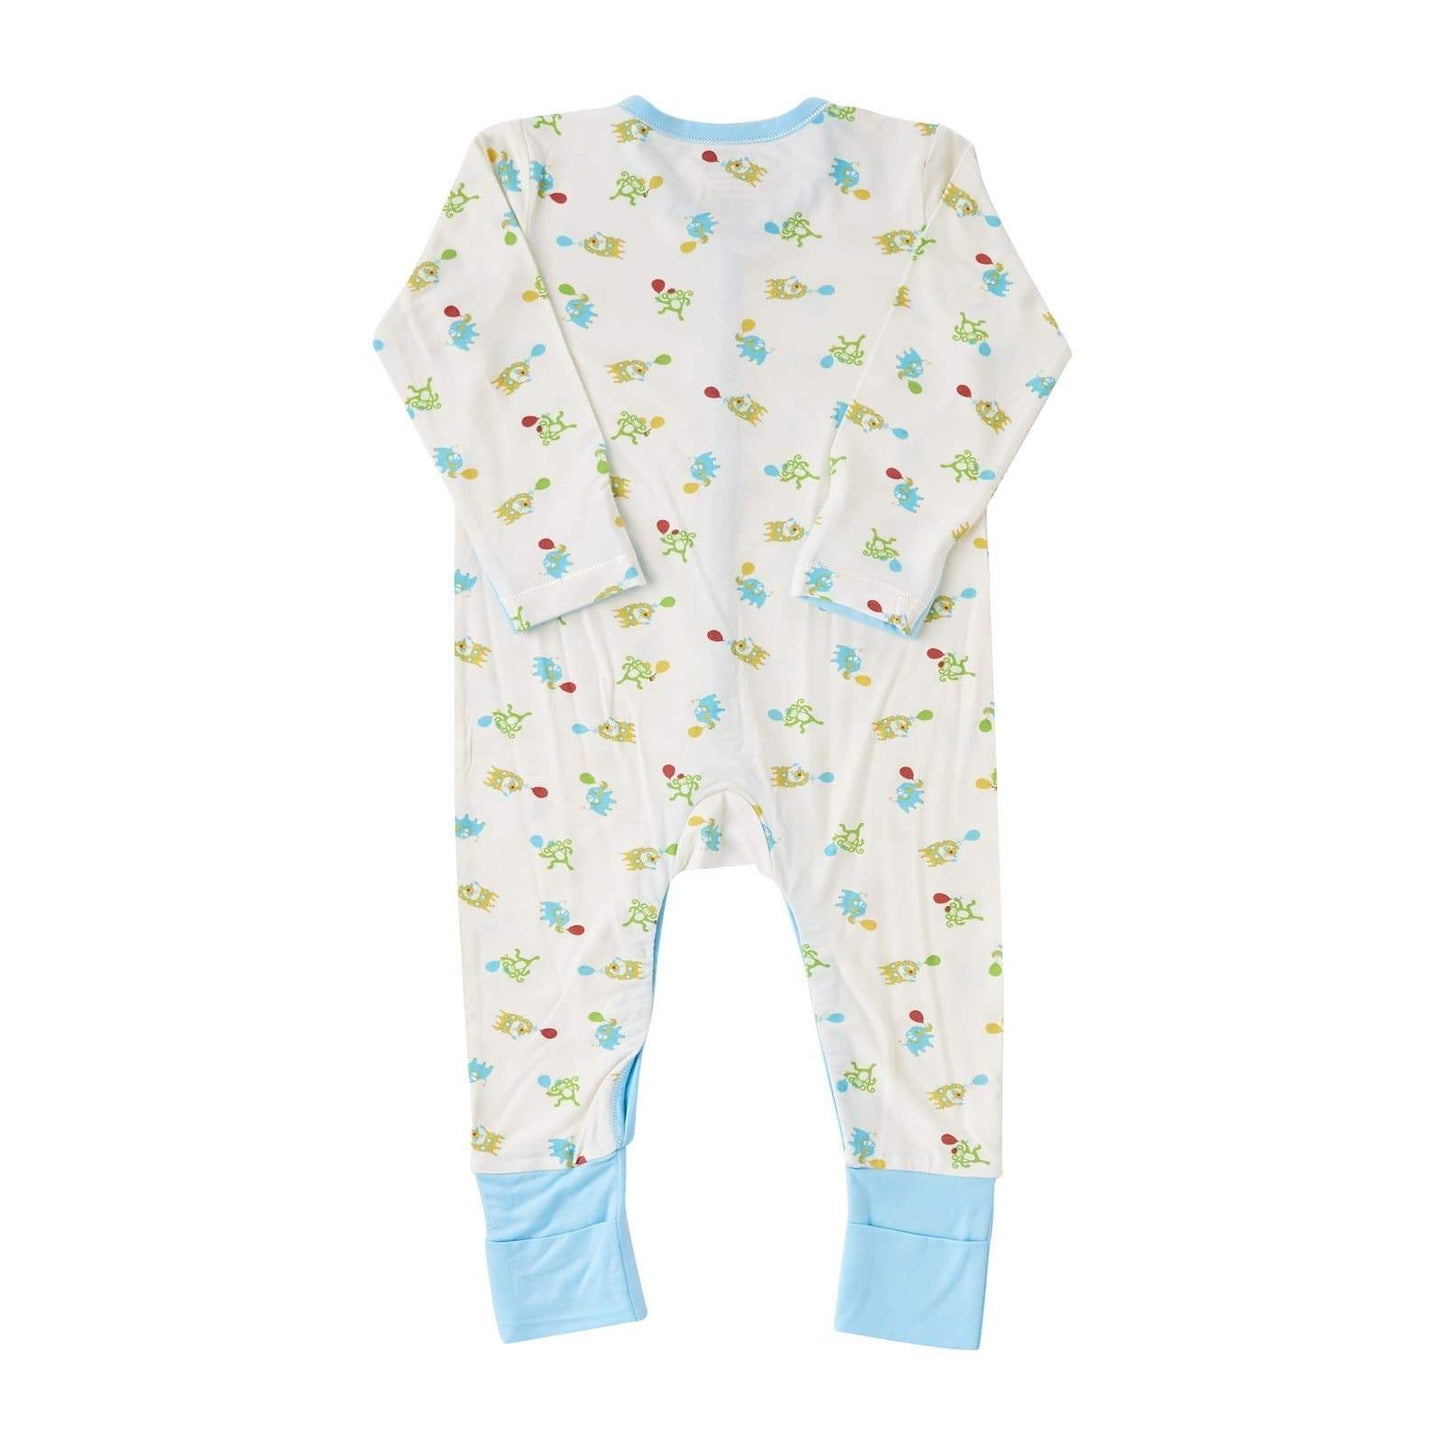 Safari - Long-sleeved Button Sleepsuit with Folded Mittens & Footie (Turquoise)